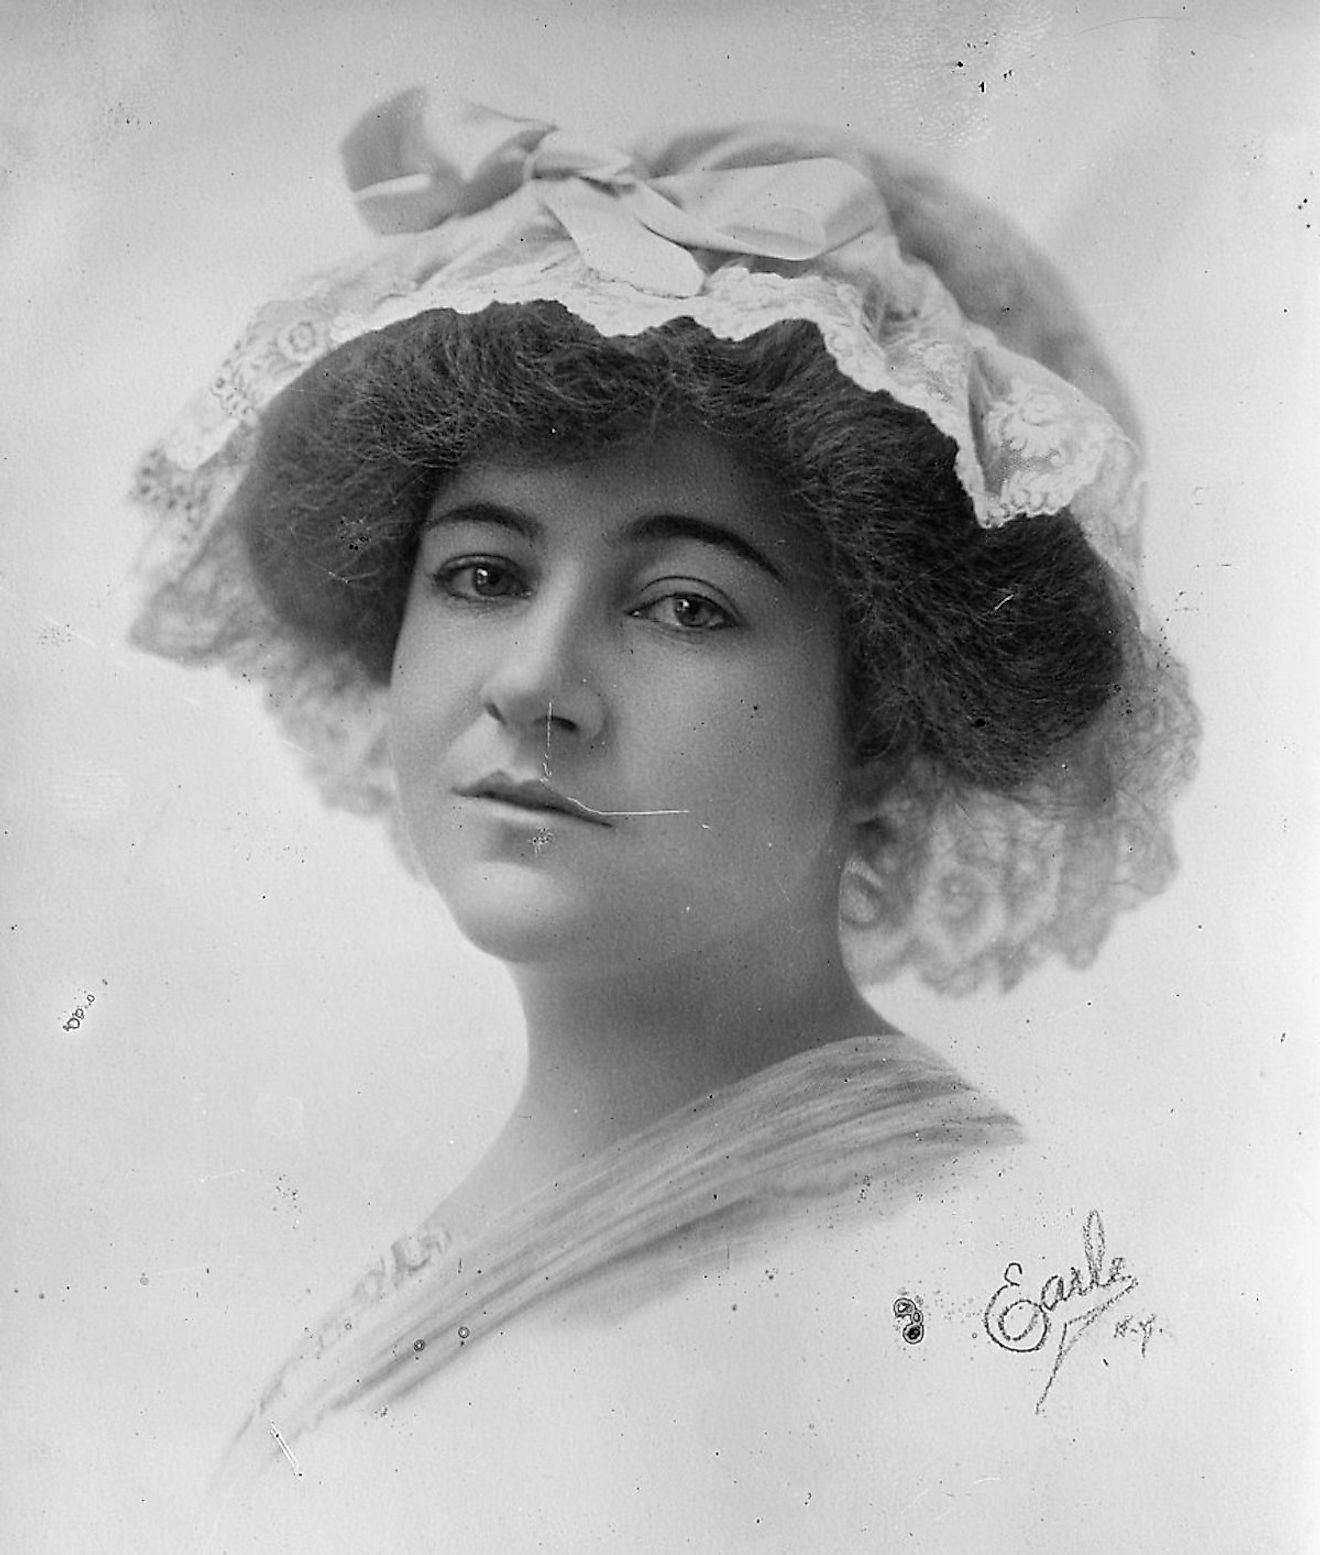 Dorothy Arnold, missing woman, portrait. Image credit: Library of Congress/Public domain